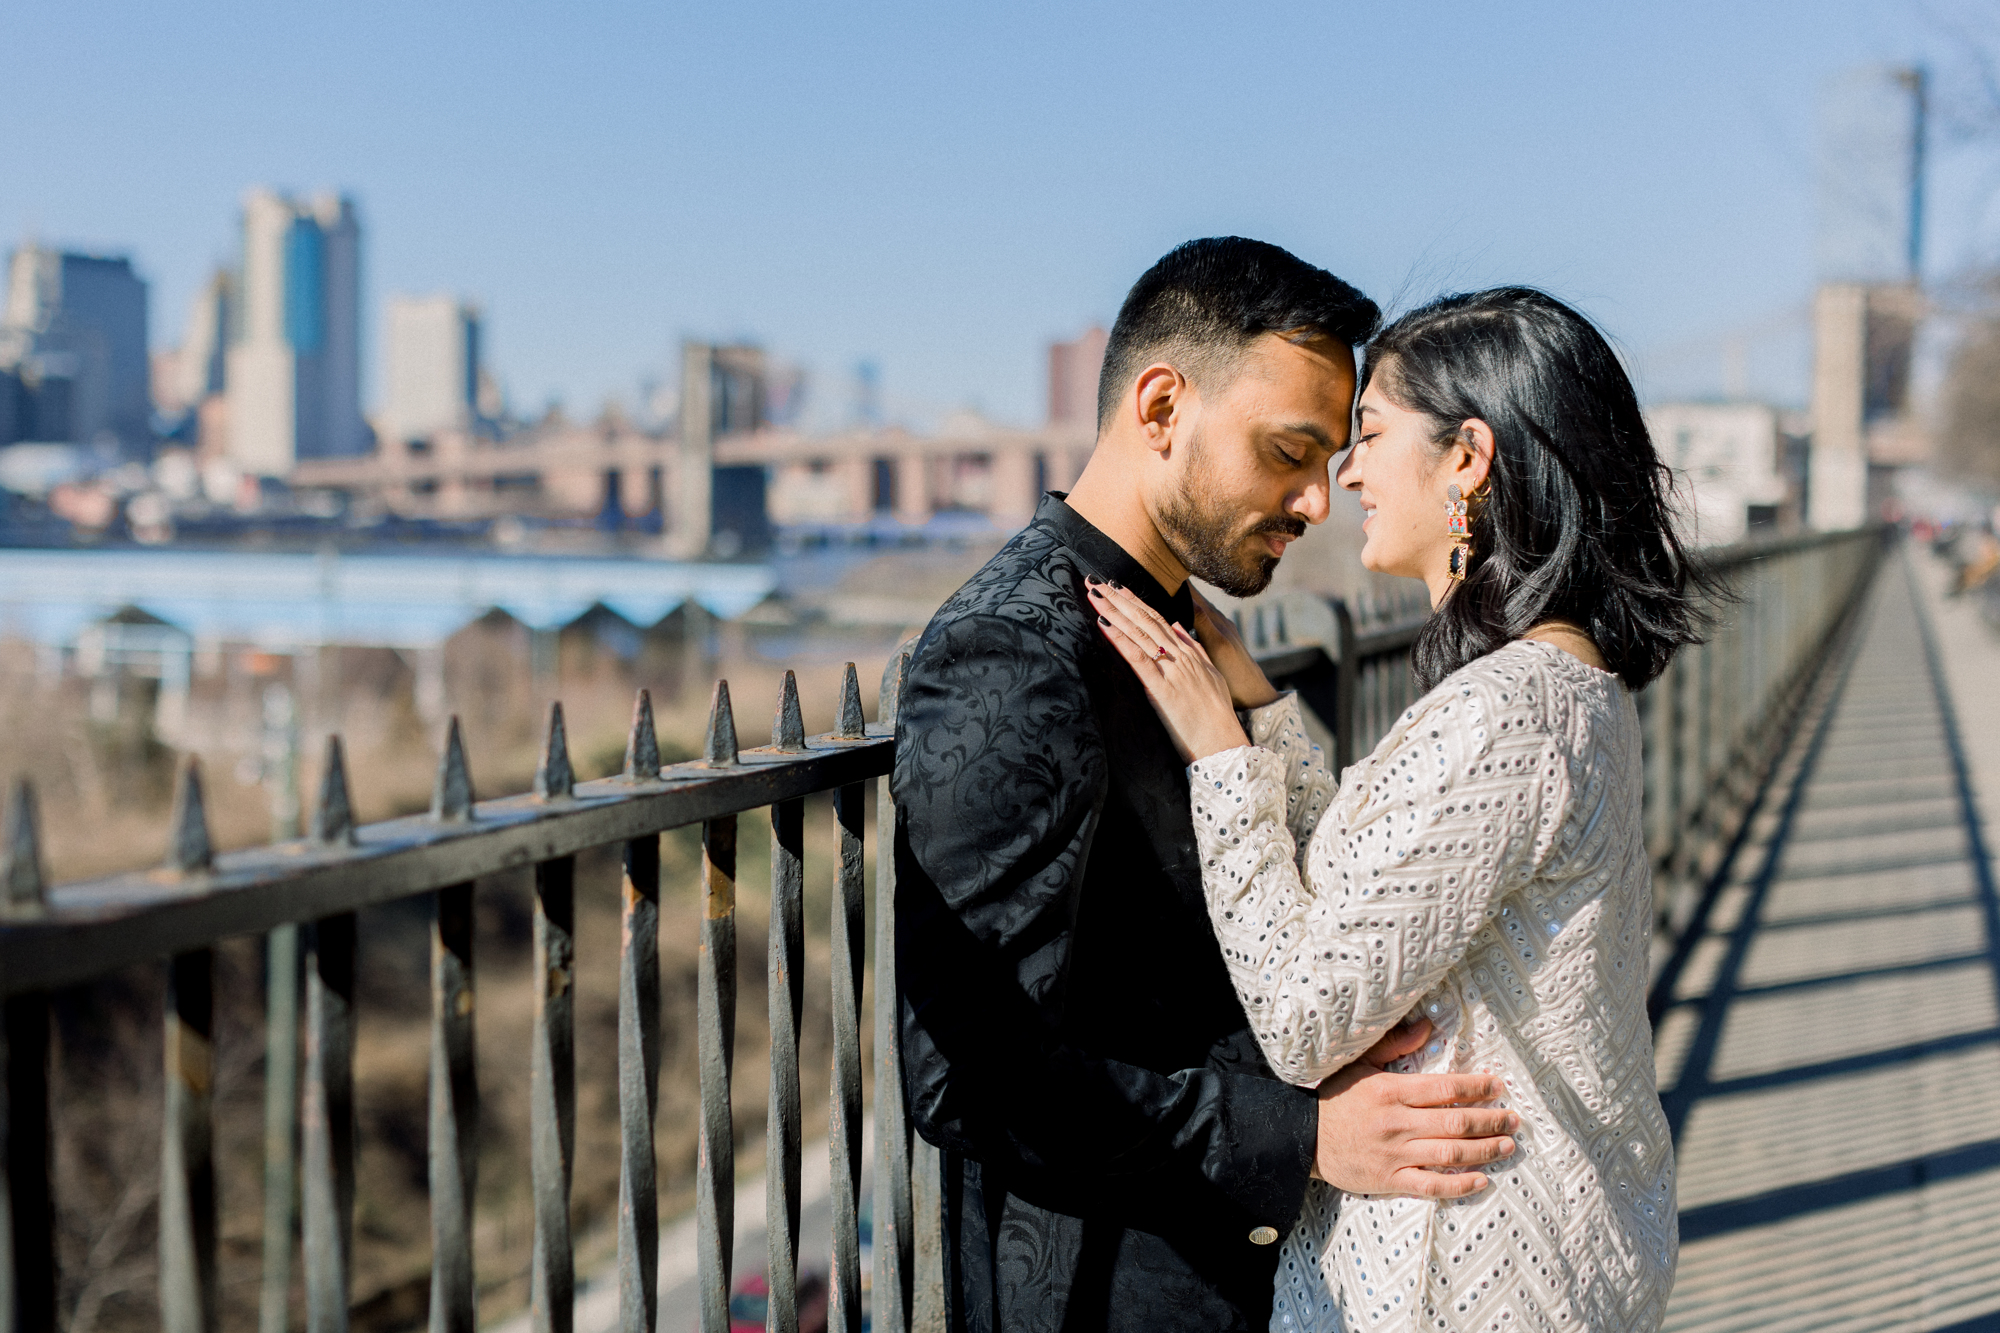 Sweet and Wintery Brooklyn Heights Promenade Engagement Photos